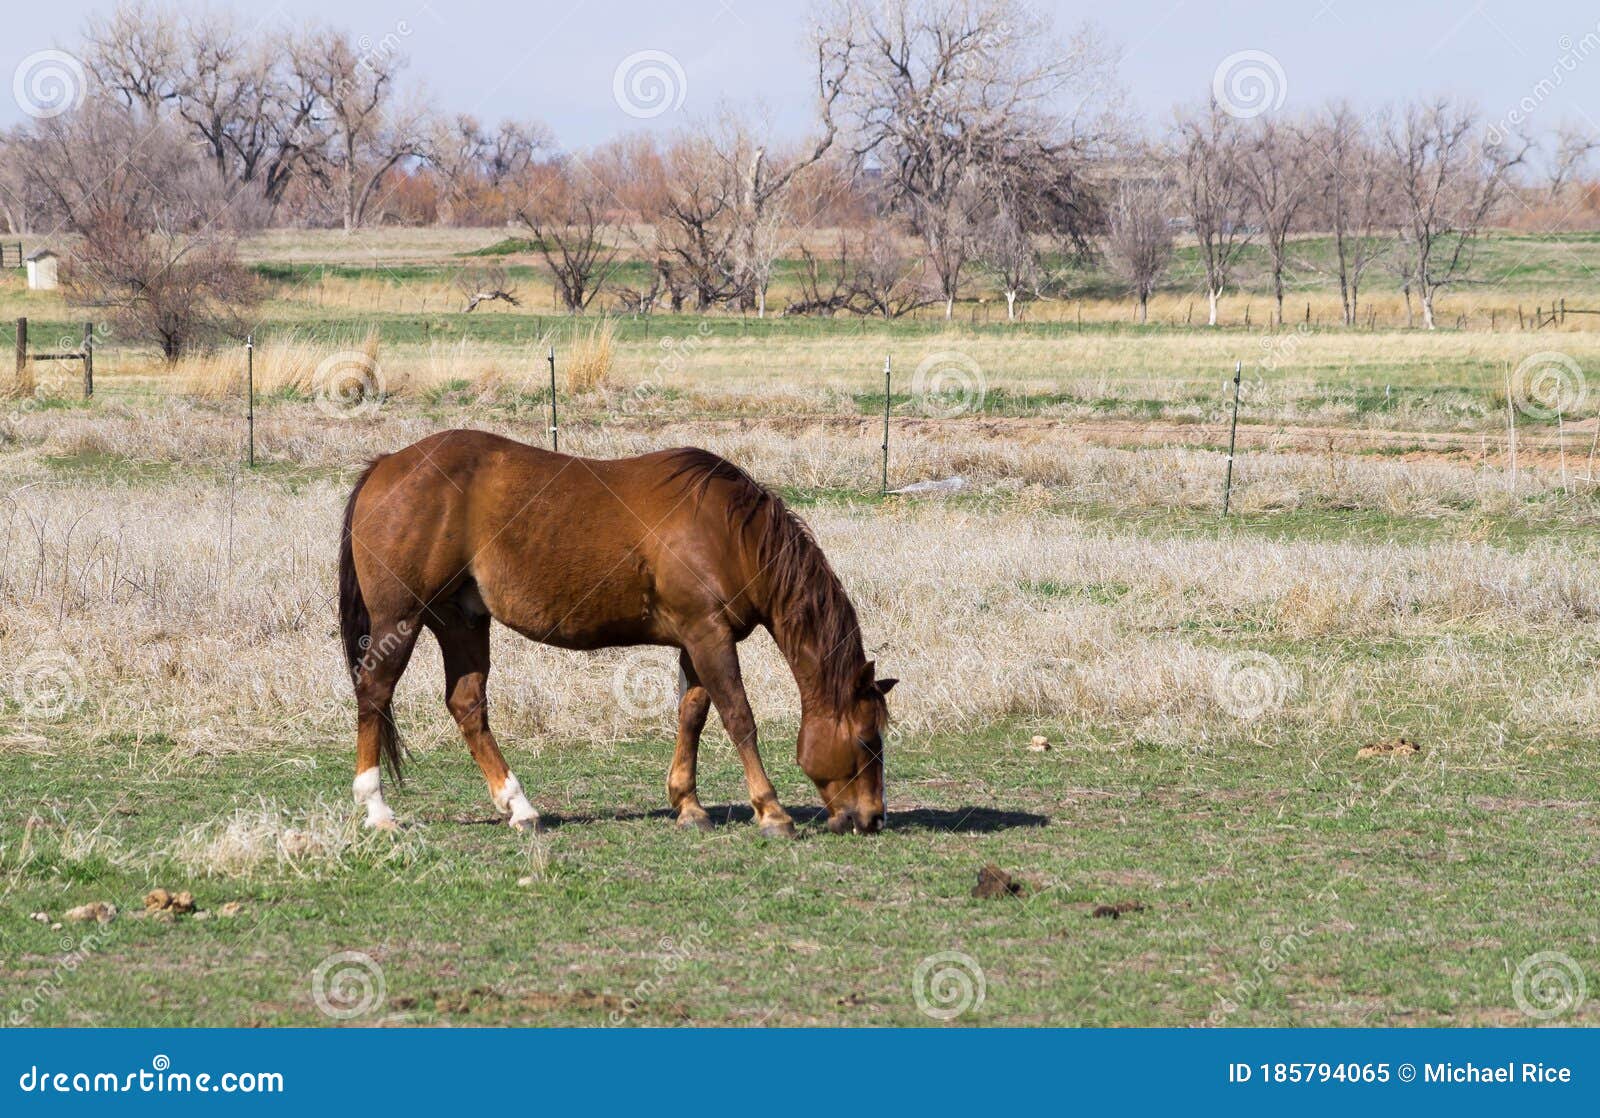 Brown Horse Grazing On Grass Field Stock Image Image Of Brown